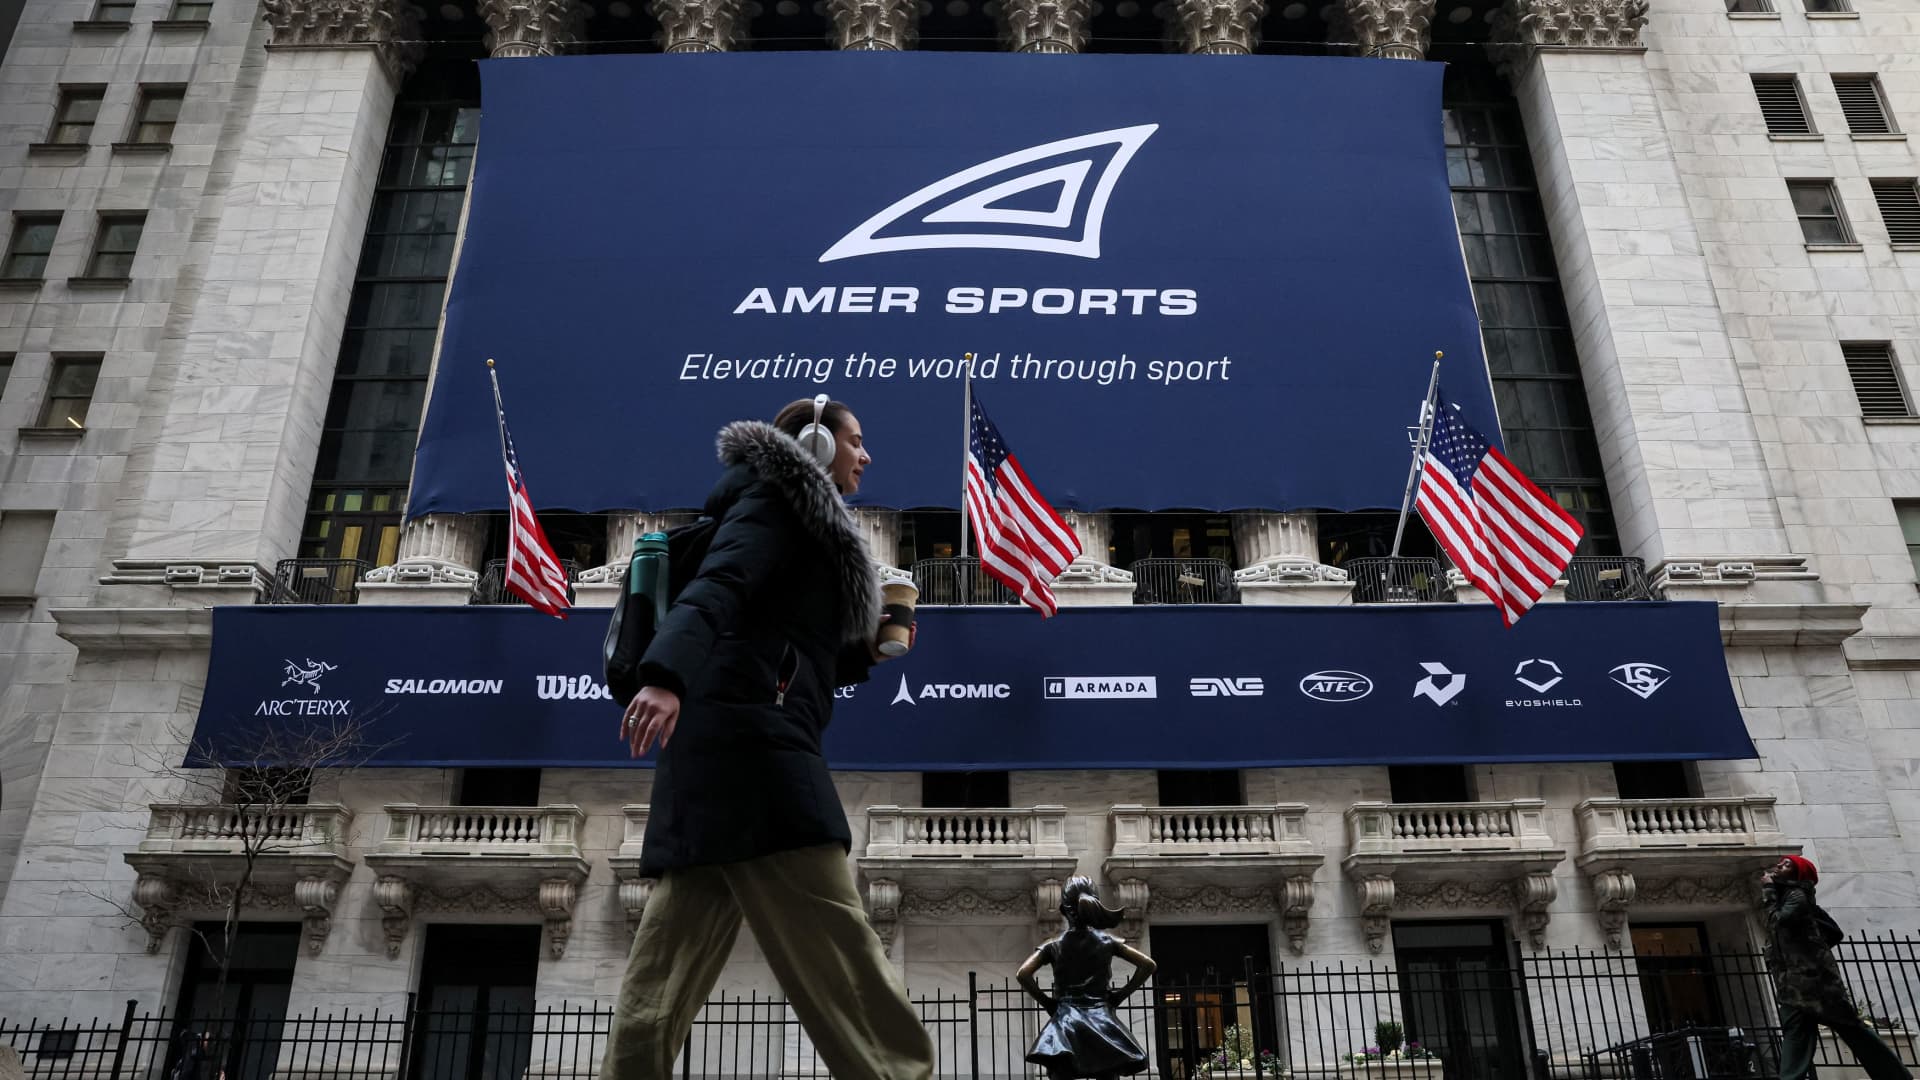 CNBC’s Cramer Warns Investors to Steer Clear of Amer Sports in Unpredictable IPO Market